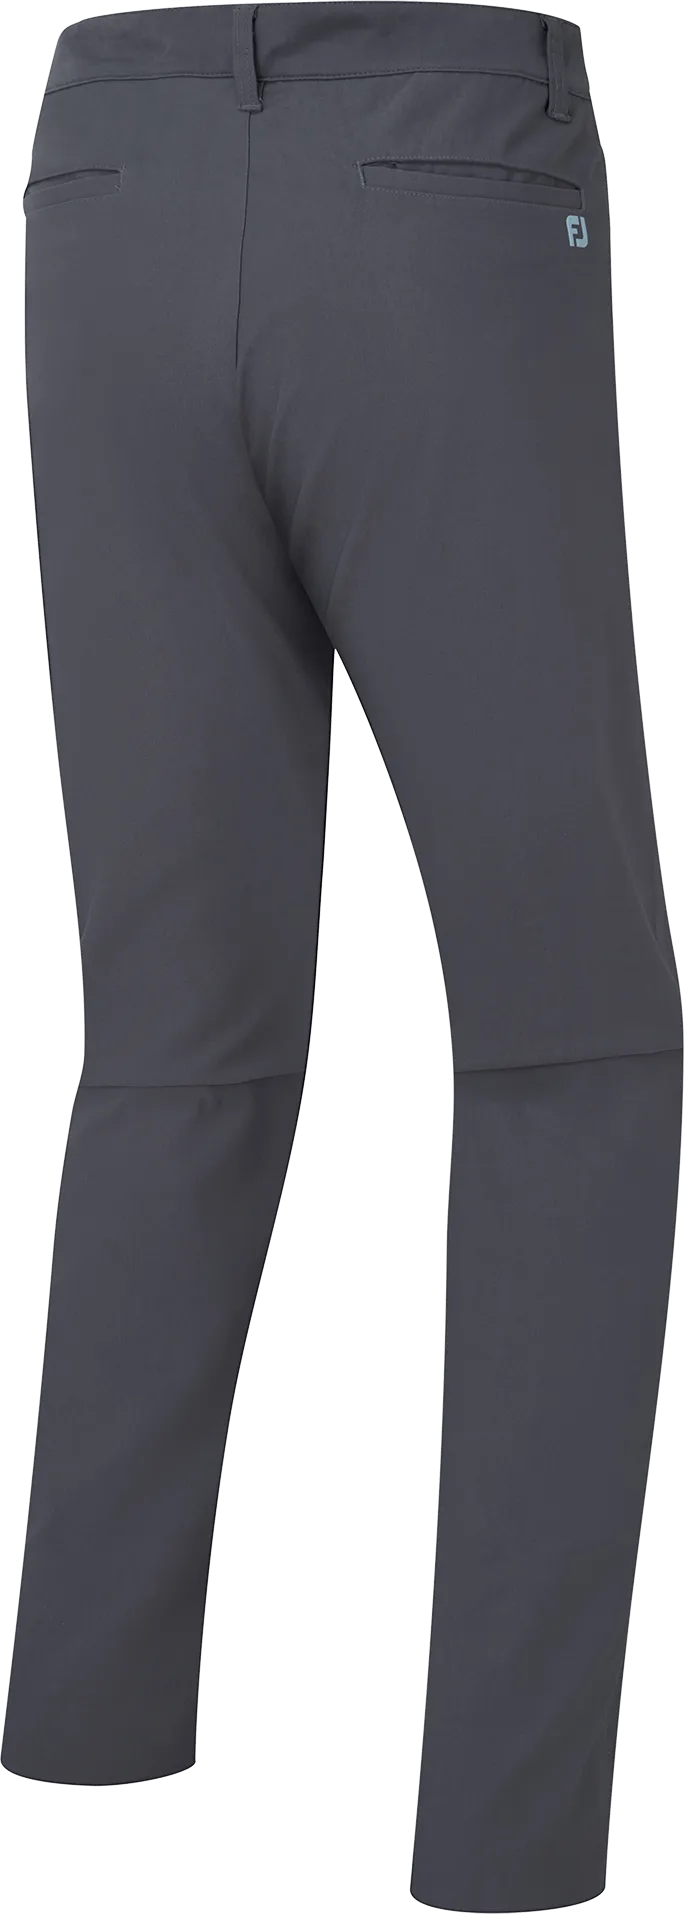 FootJoy ThermoSeries Golfhose, anthrazit